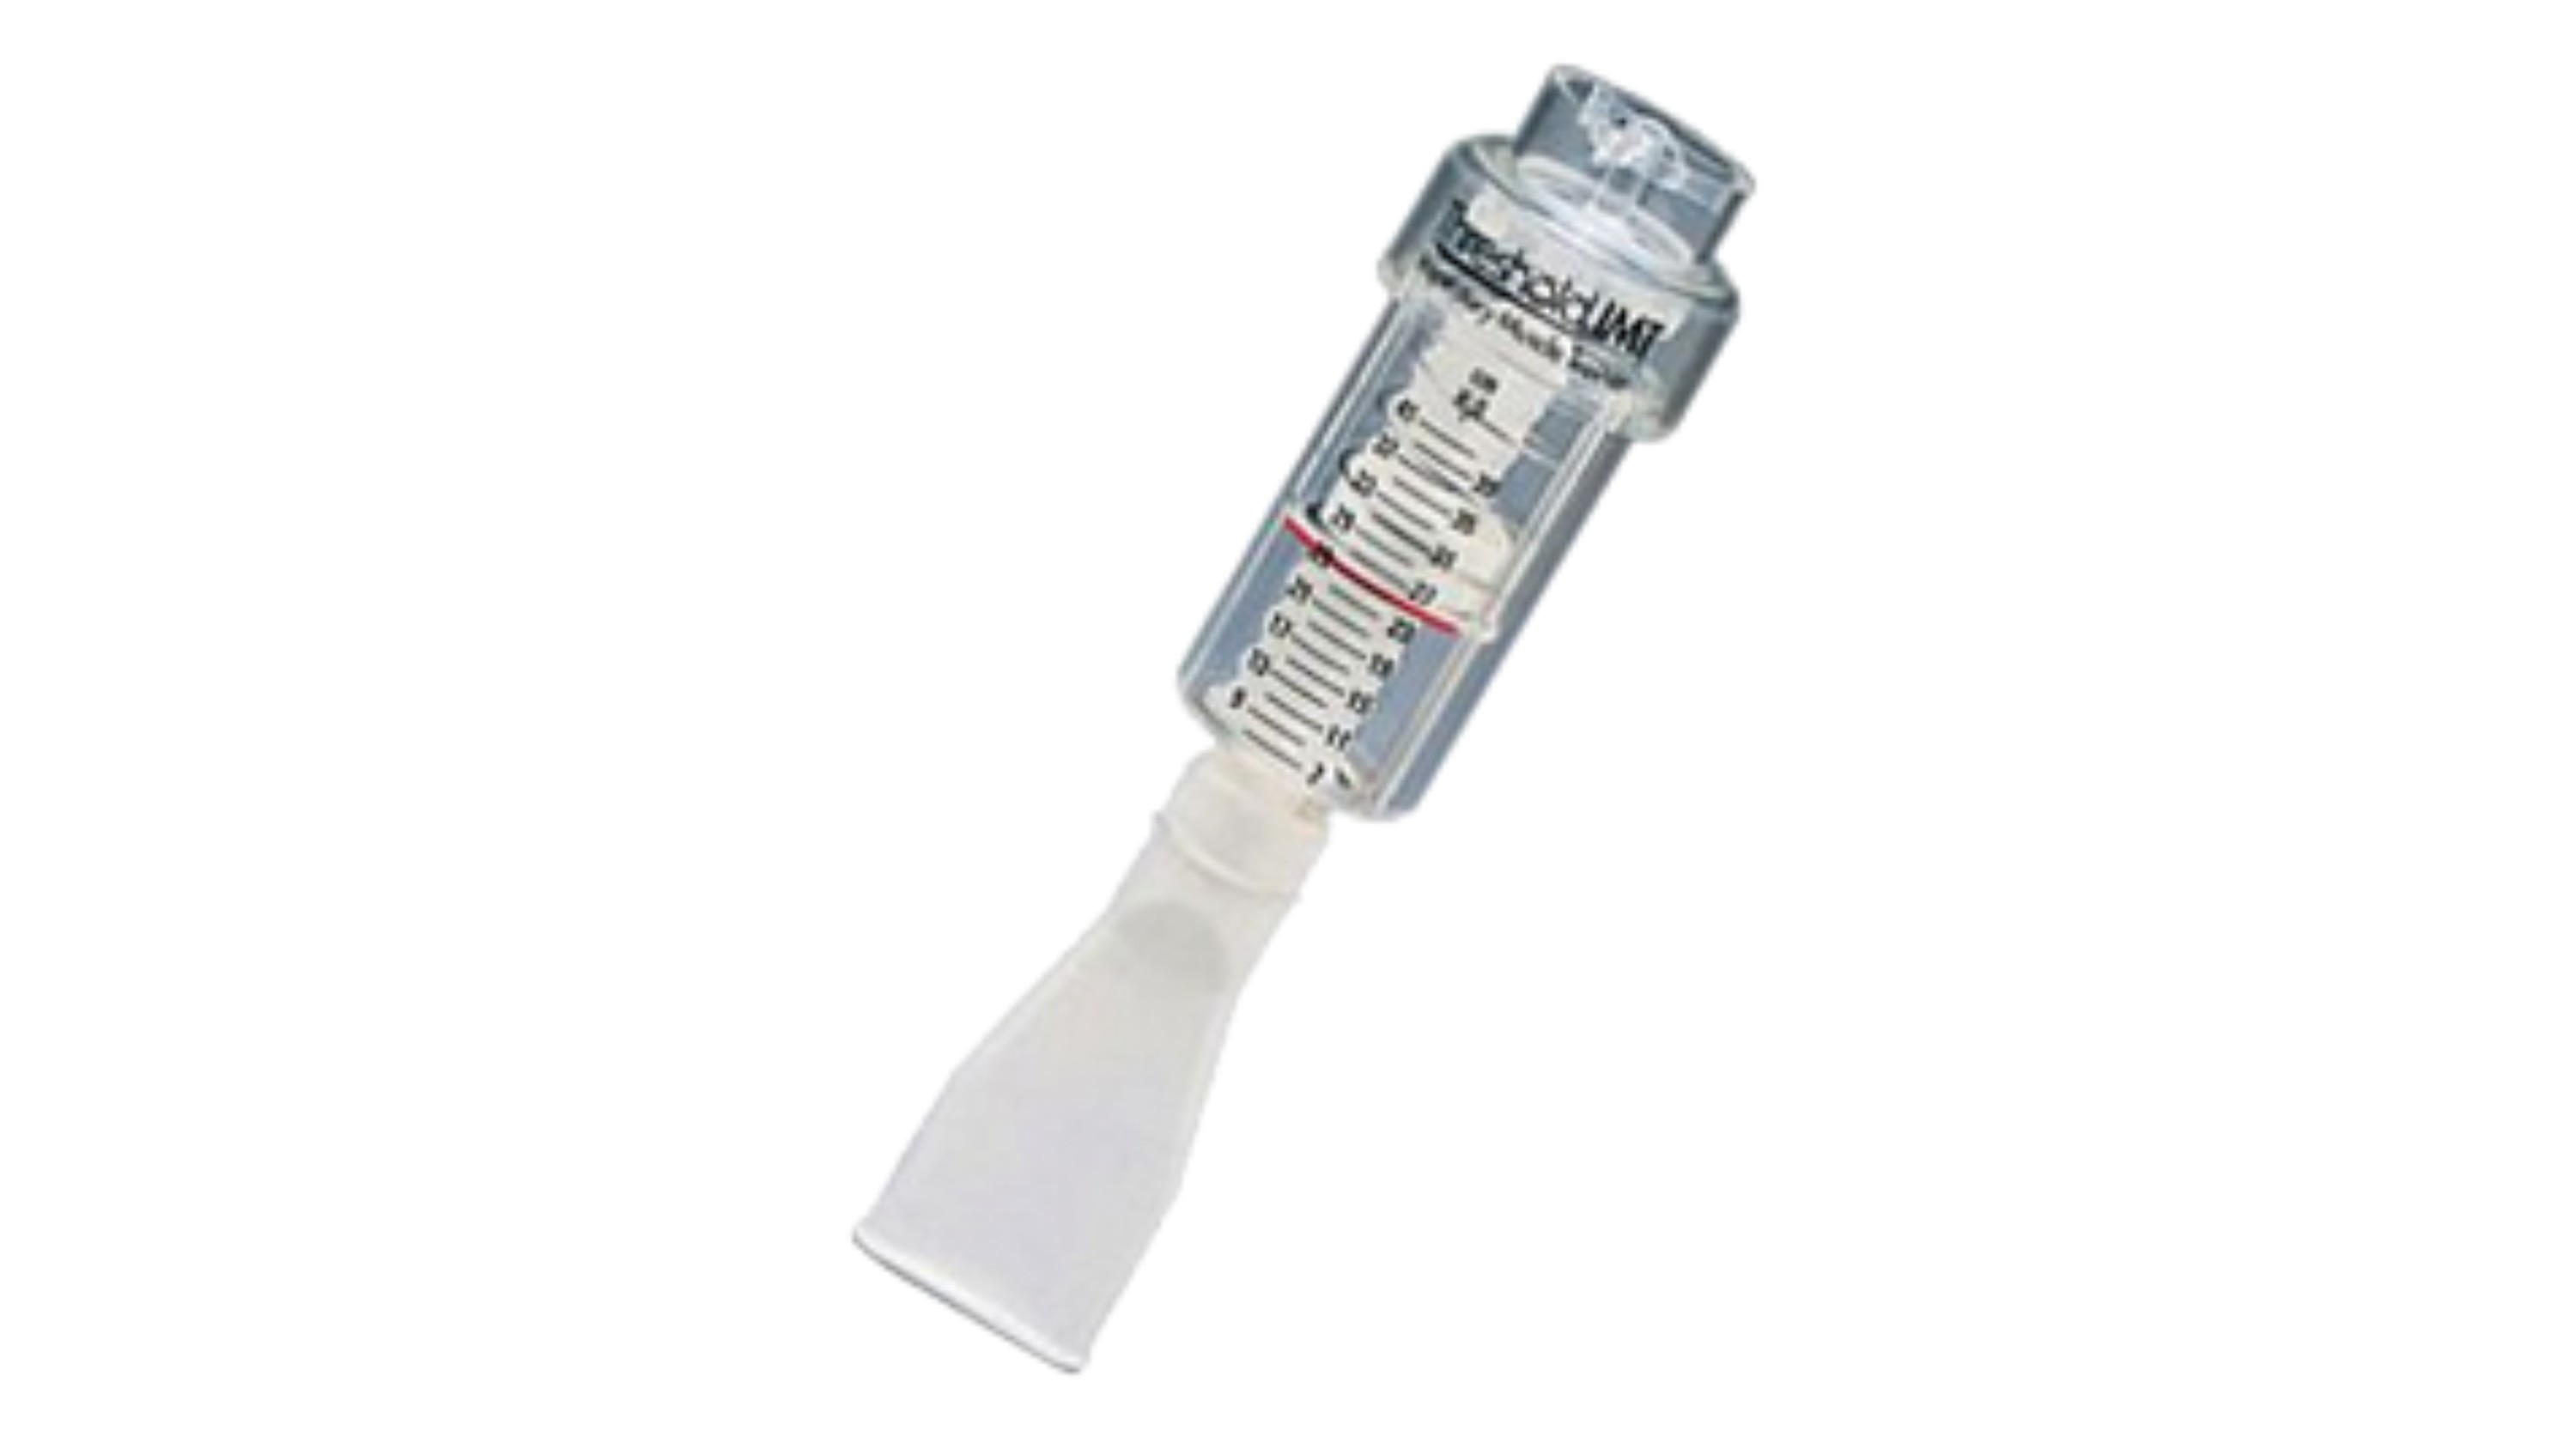 With this Treshold IMT resistance measure you can improve the respiratory muscles